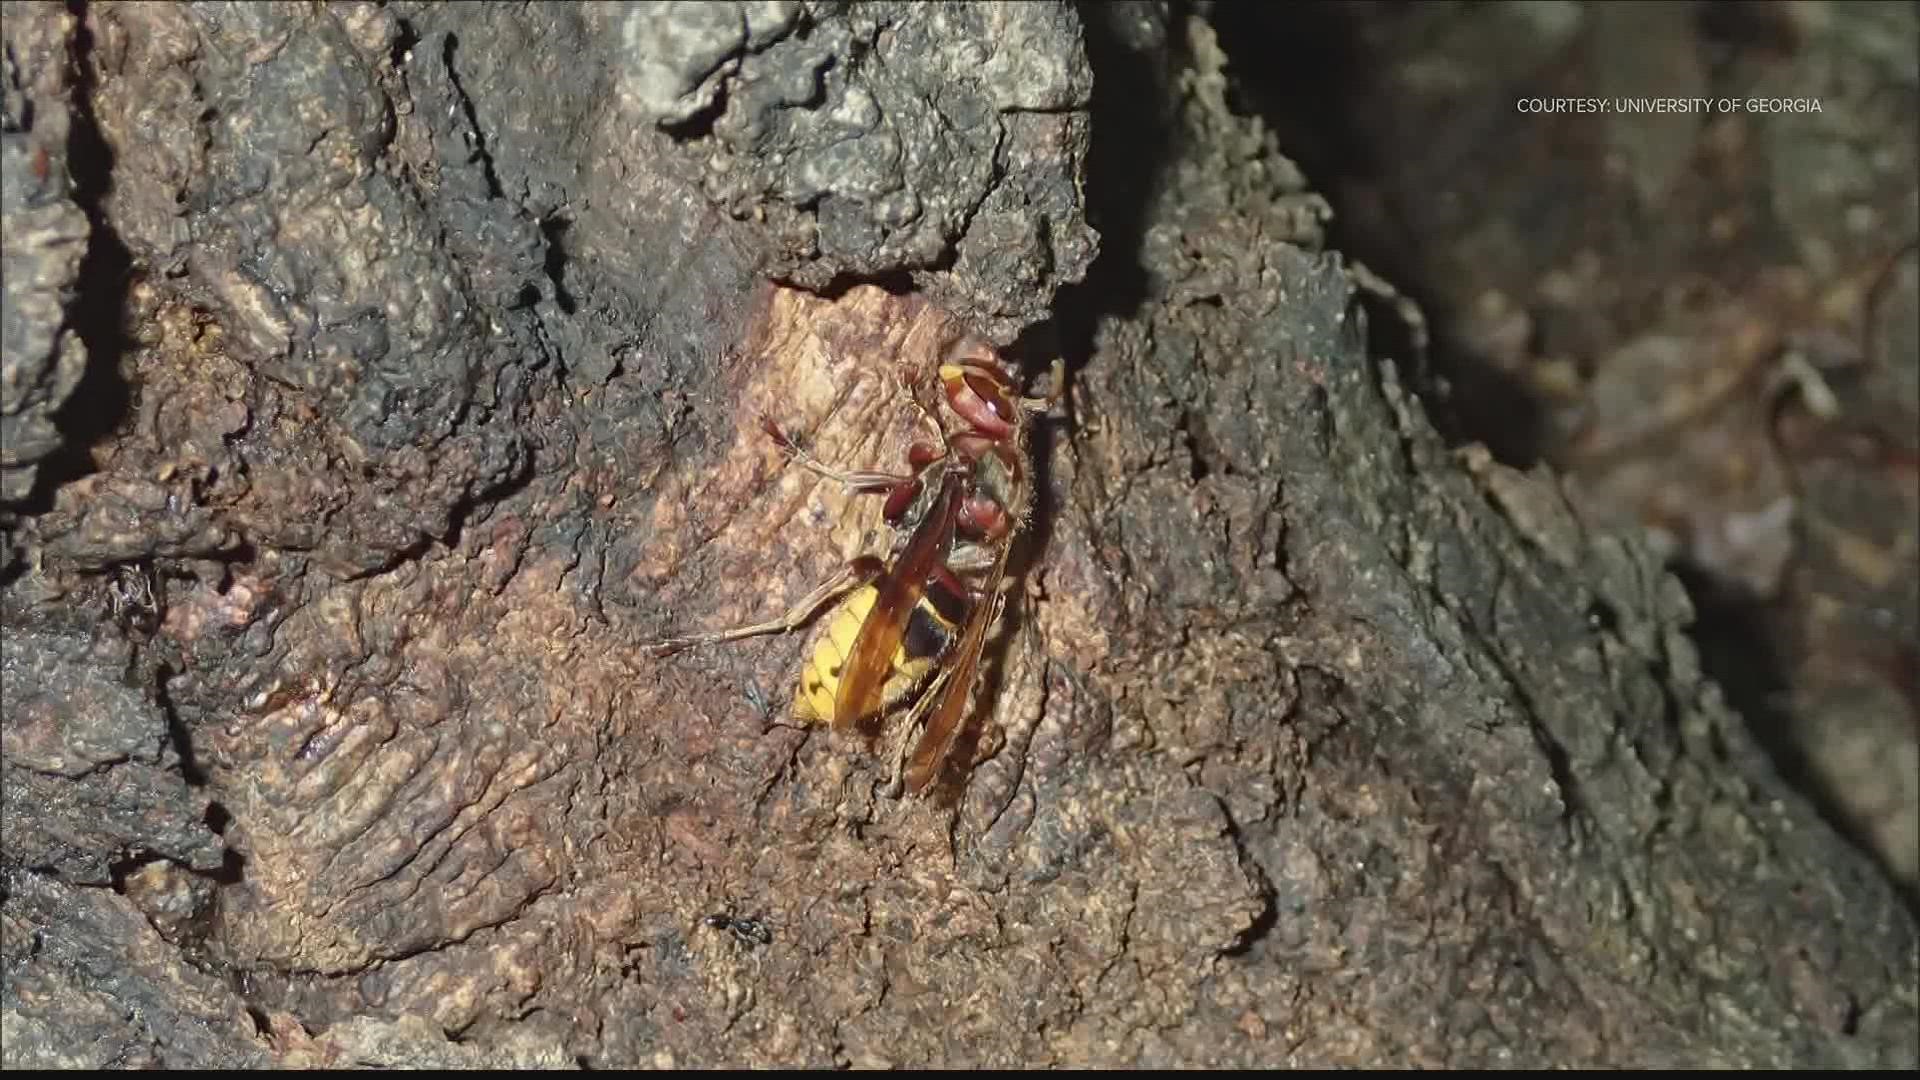 Viewers at home have been asking if European hornets have made their way to Georgia.